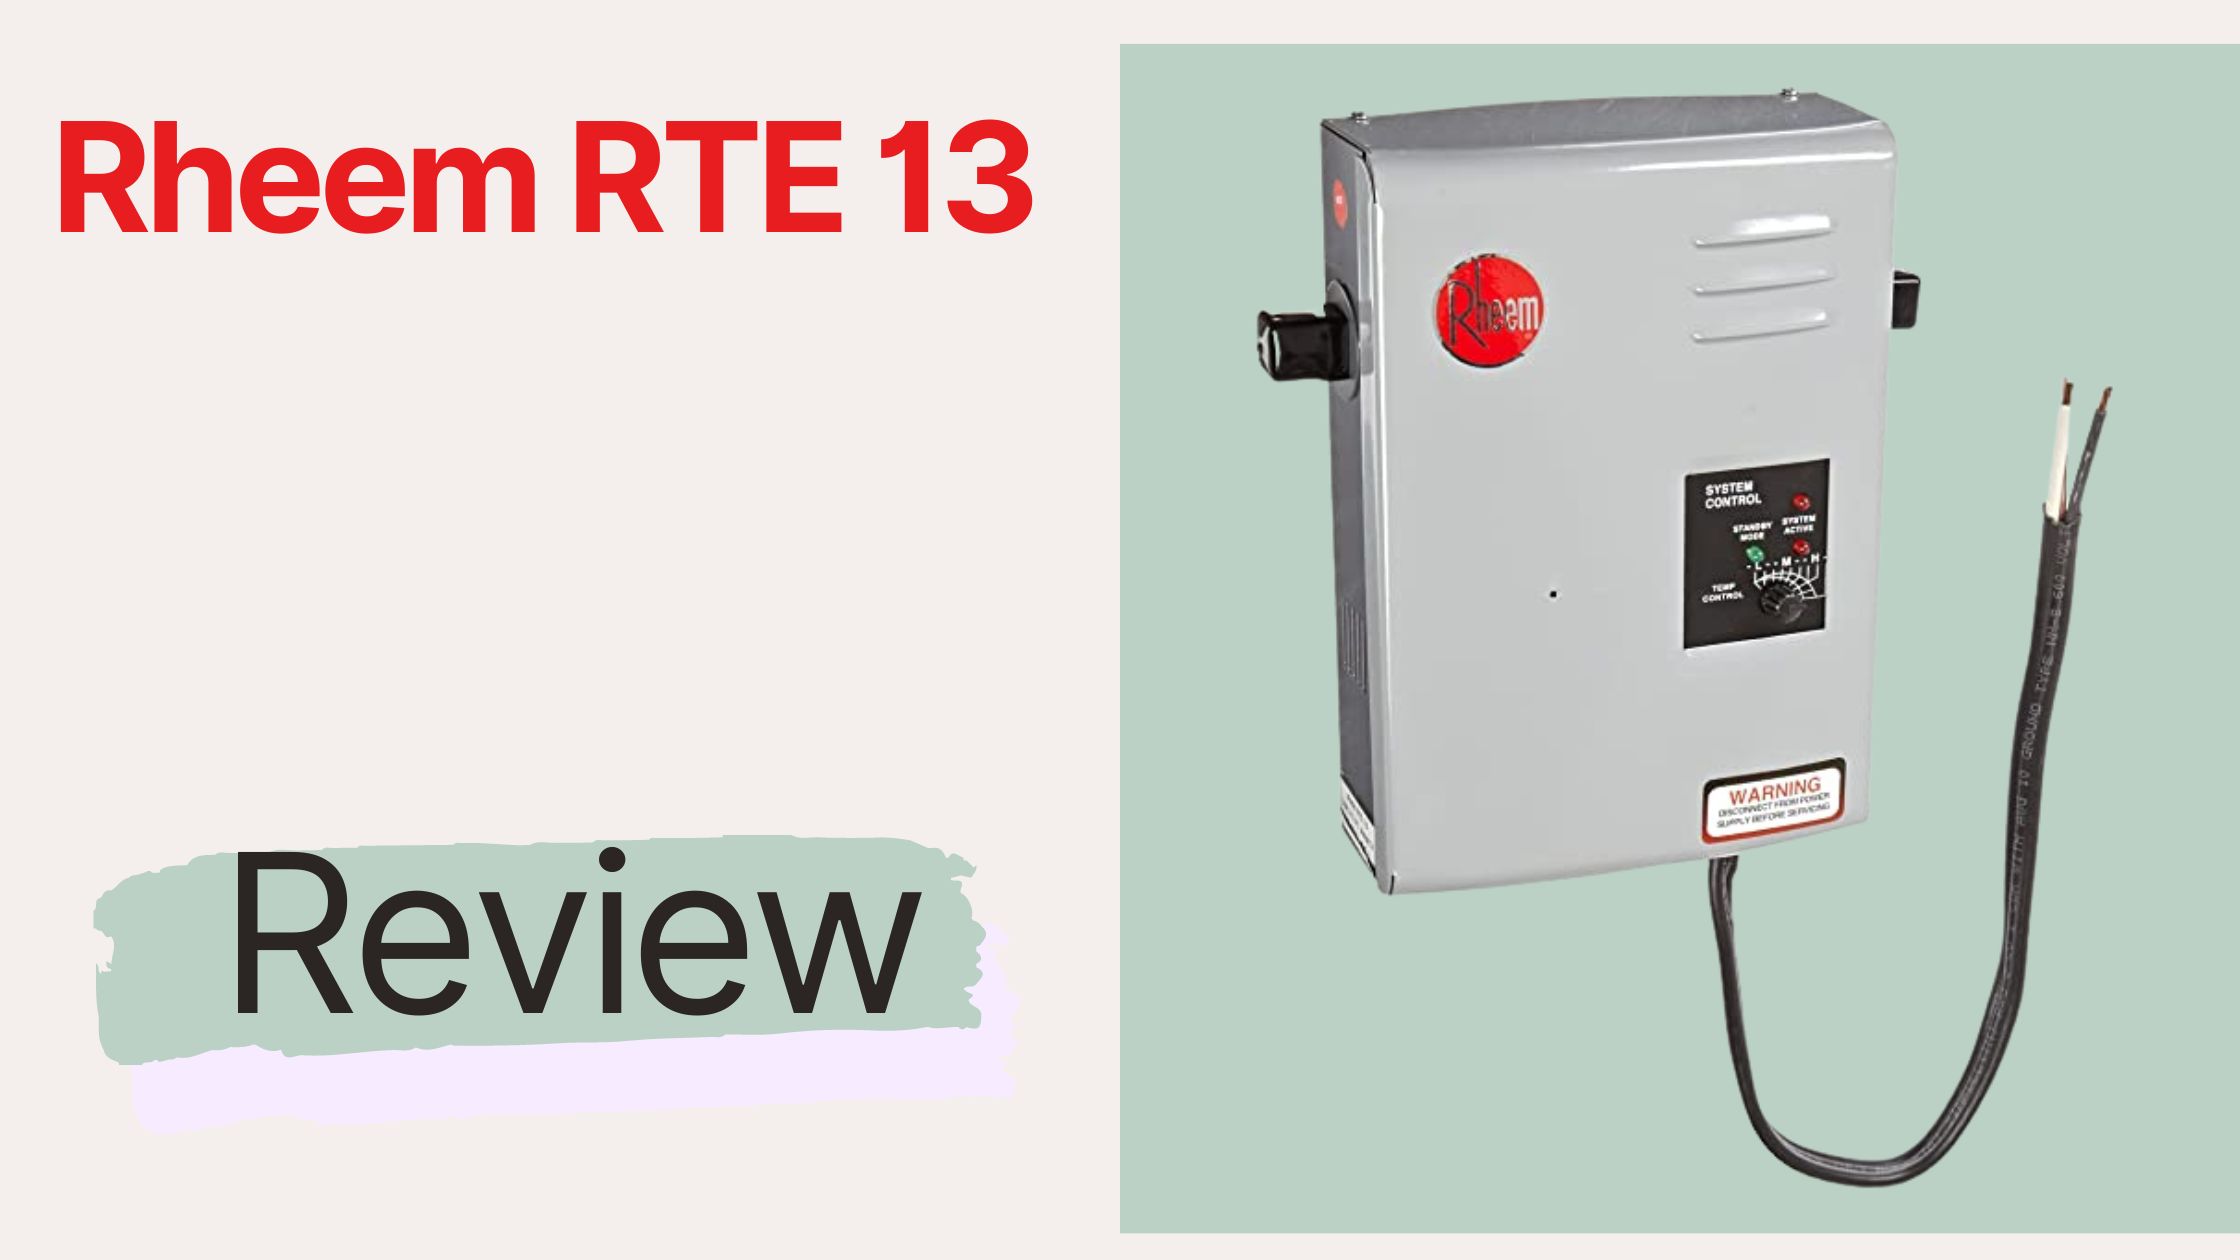 Rheem RTE 13 Electric Tankless Water Heater Review